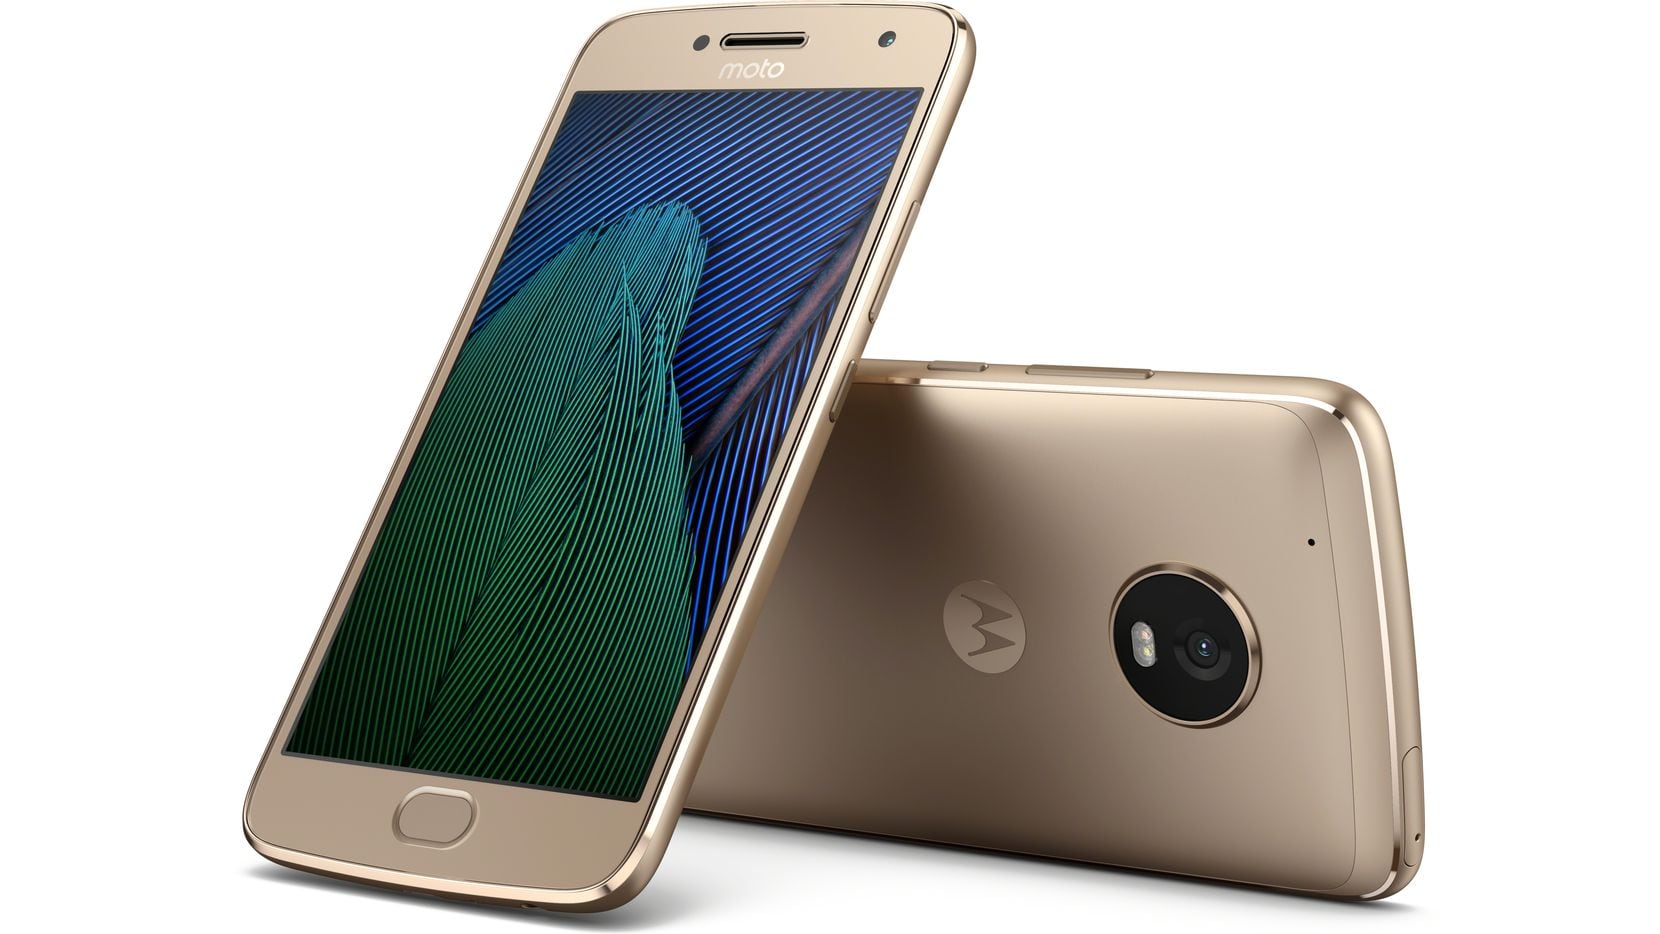 Bergbeklimmer Korting Begraafplaats Moto G5 Plus: An inexpensive Android phone with all the right features